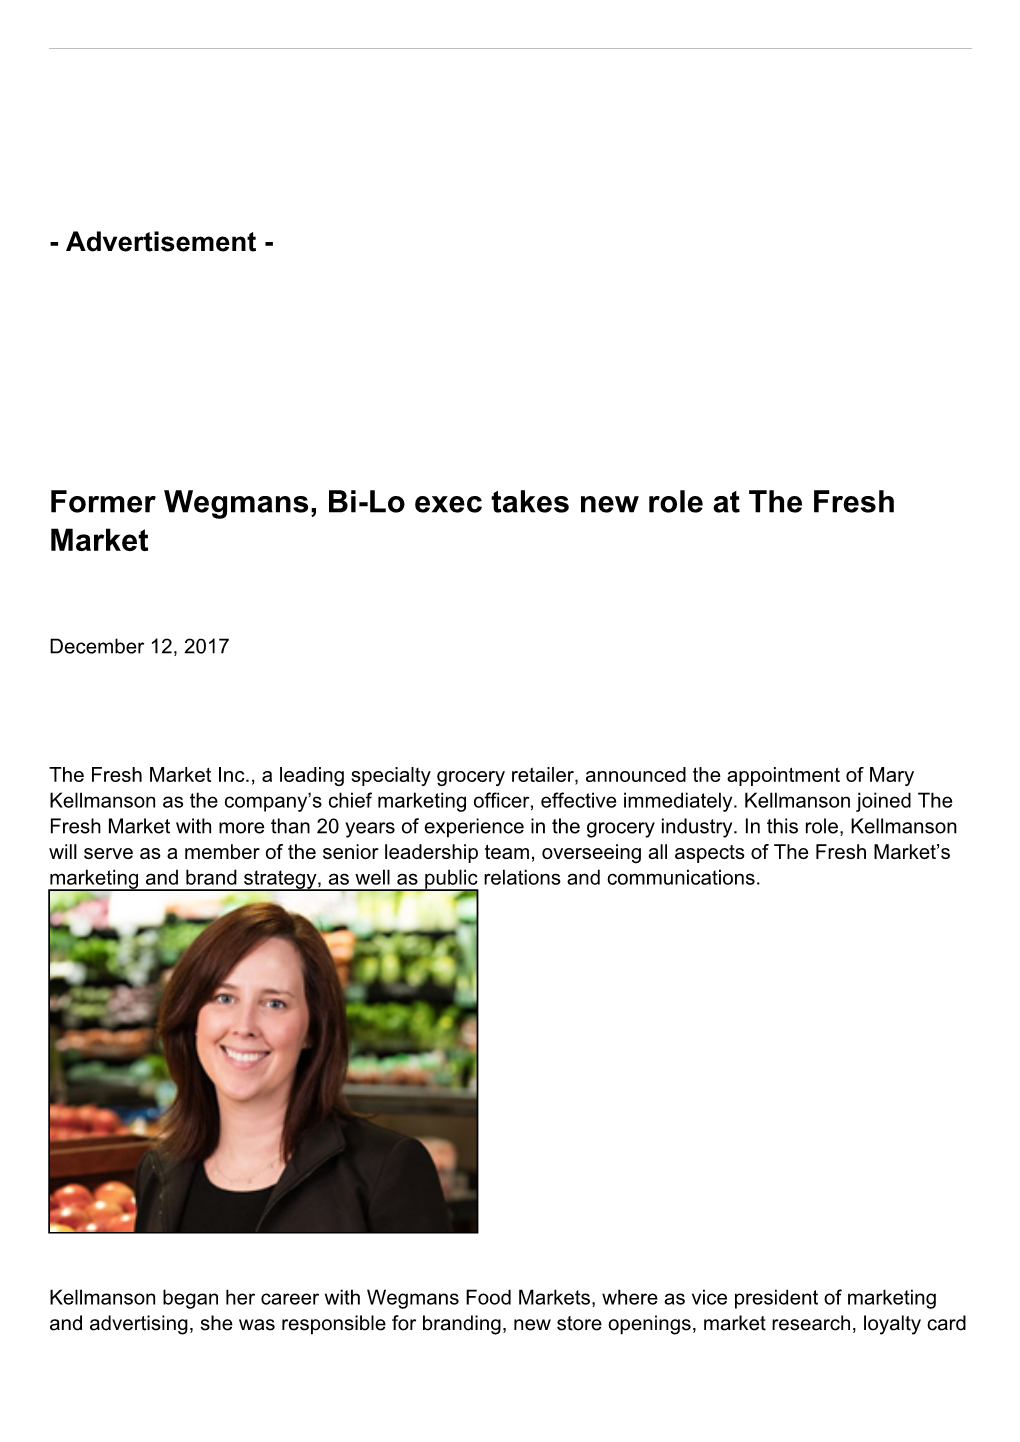 Former Wegmans, Bi-Lo Exec Takes New Role at the Fresh Market